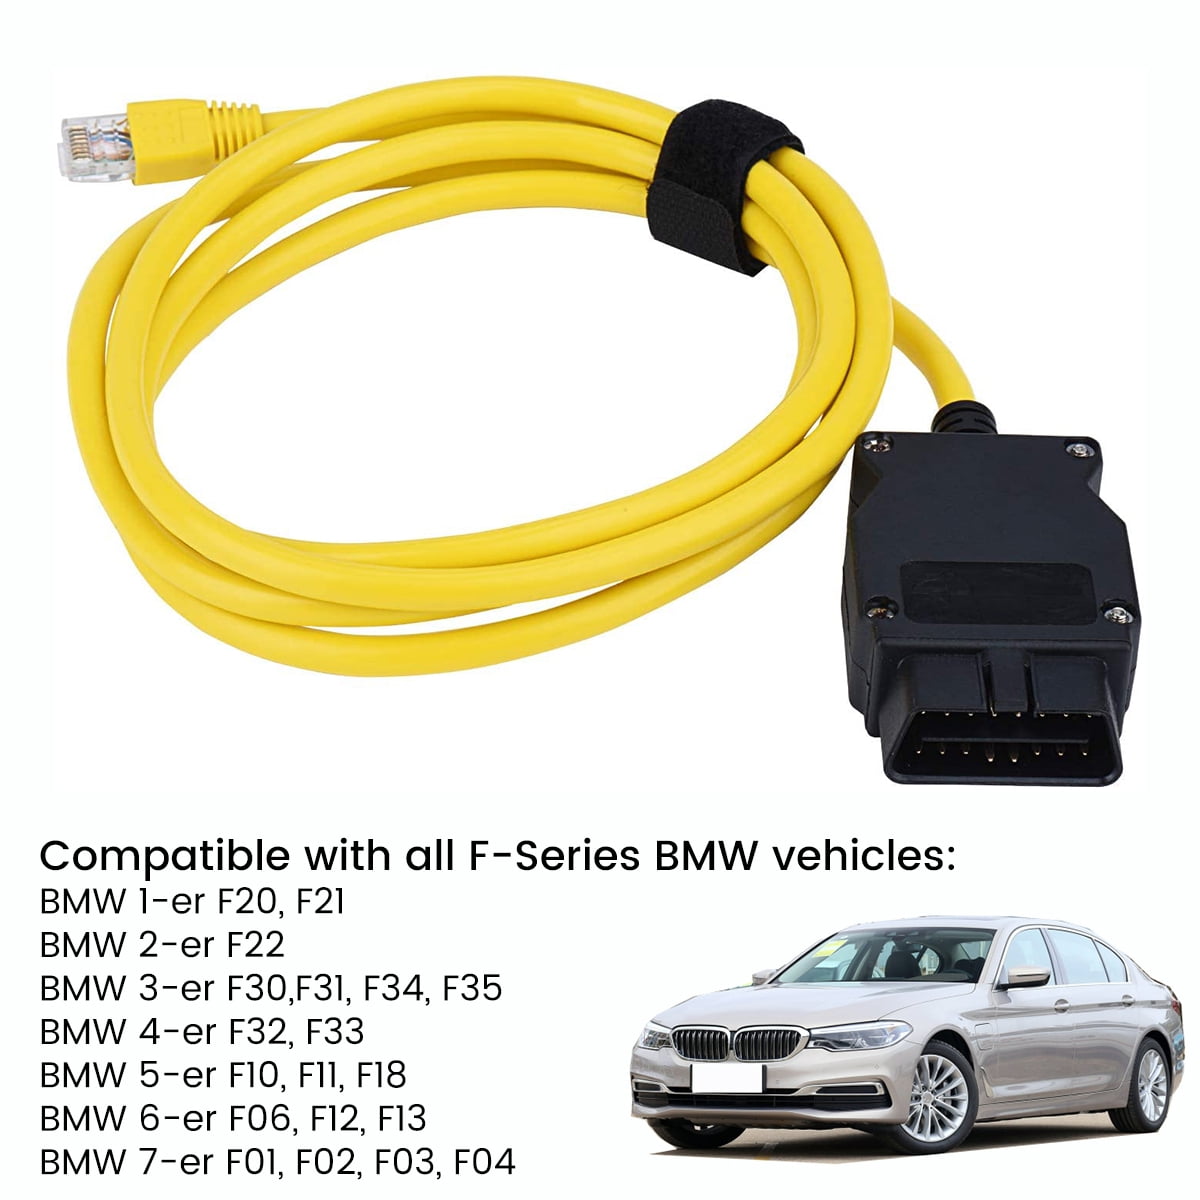 ESYS ENET Cable For BMW F-series ICOM OBD2 Coding Diagnostic Cable Ethernet  to Data OBDII Coding Hidden Data Tool OBD2 Scanner